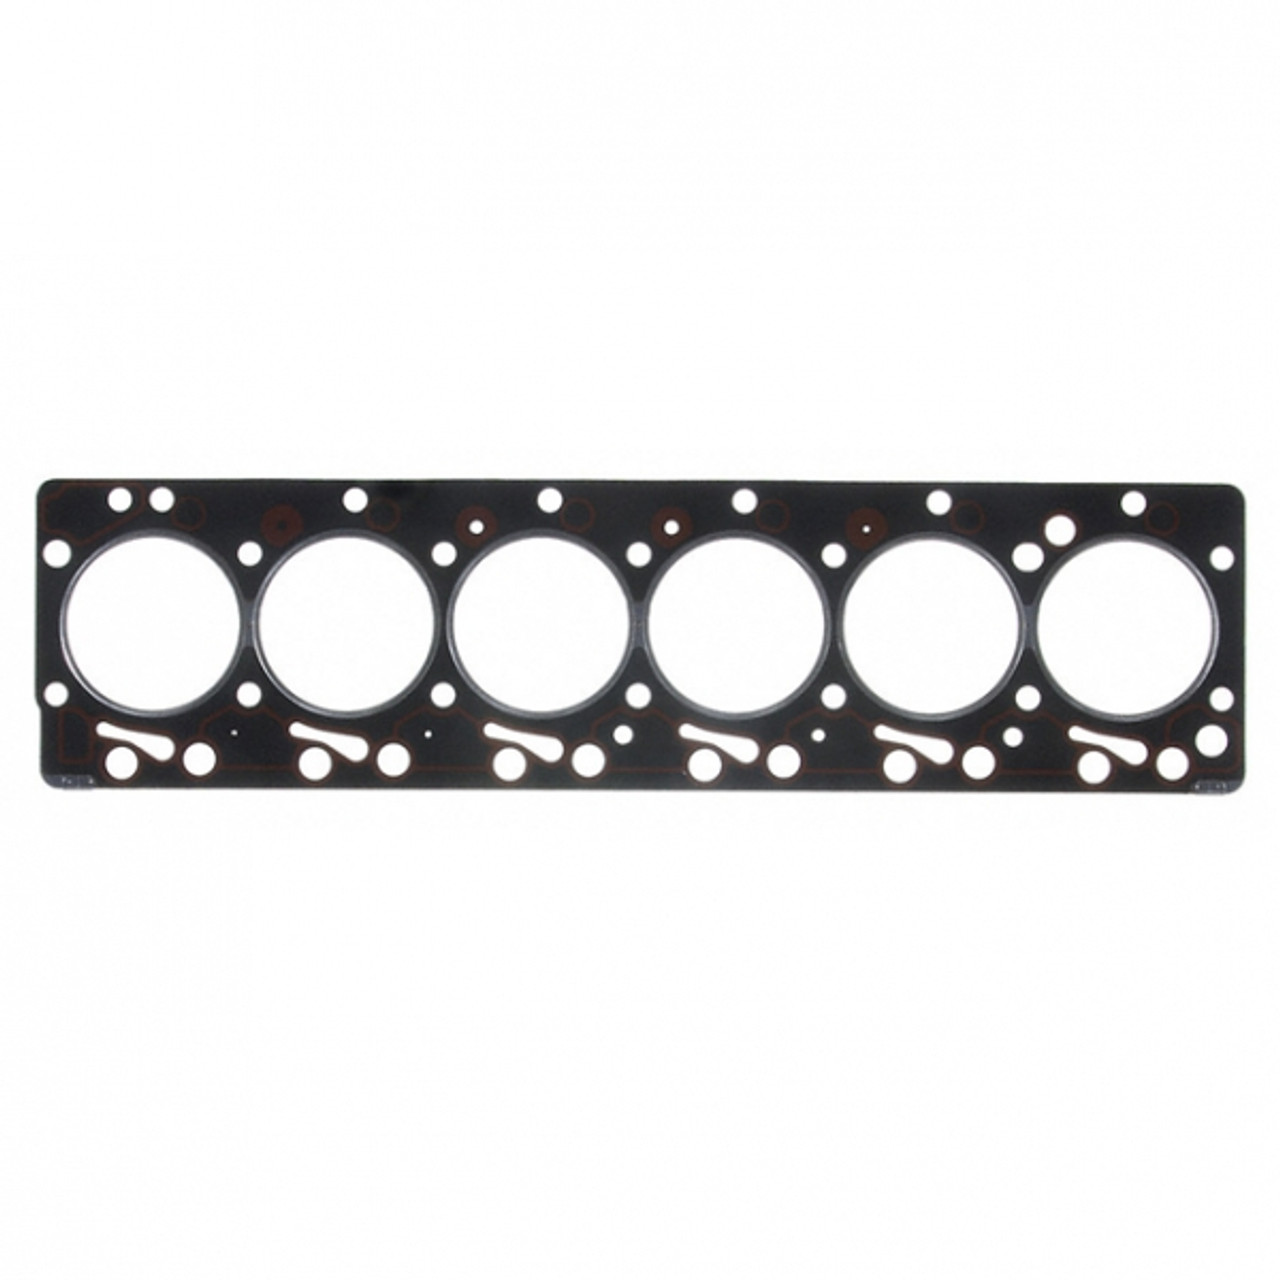 Mahle Cylinder Head Gasket 1998.5 to 2002 5.9L Cummins (MCI54174)-Main View